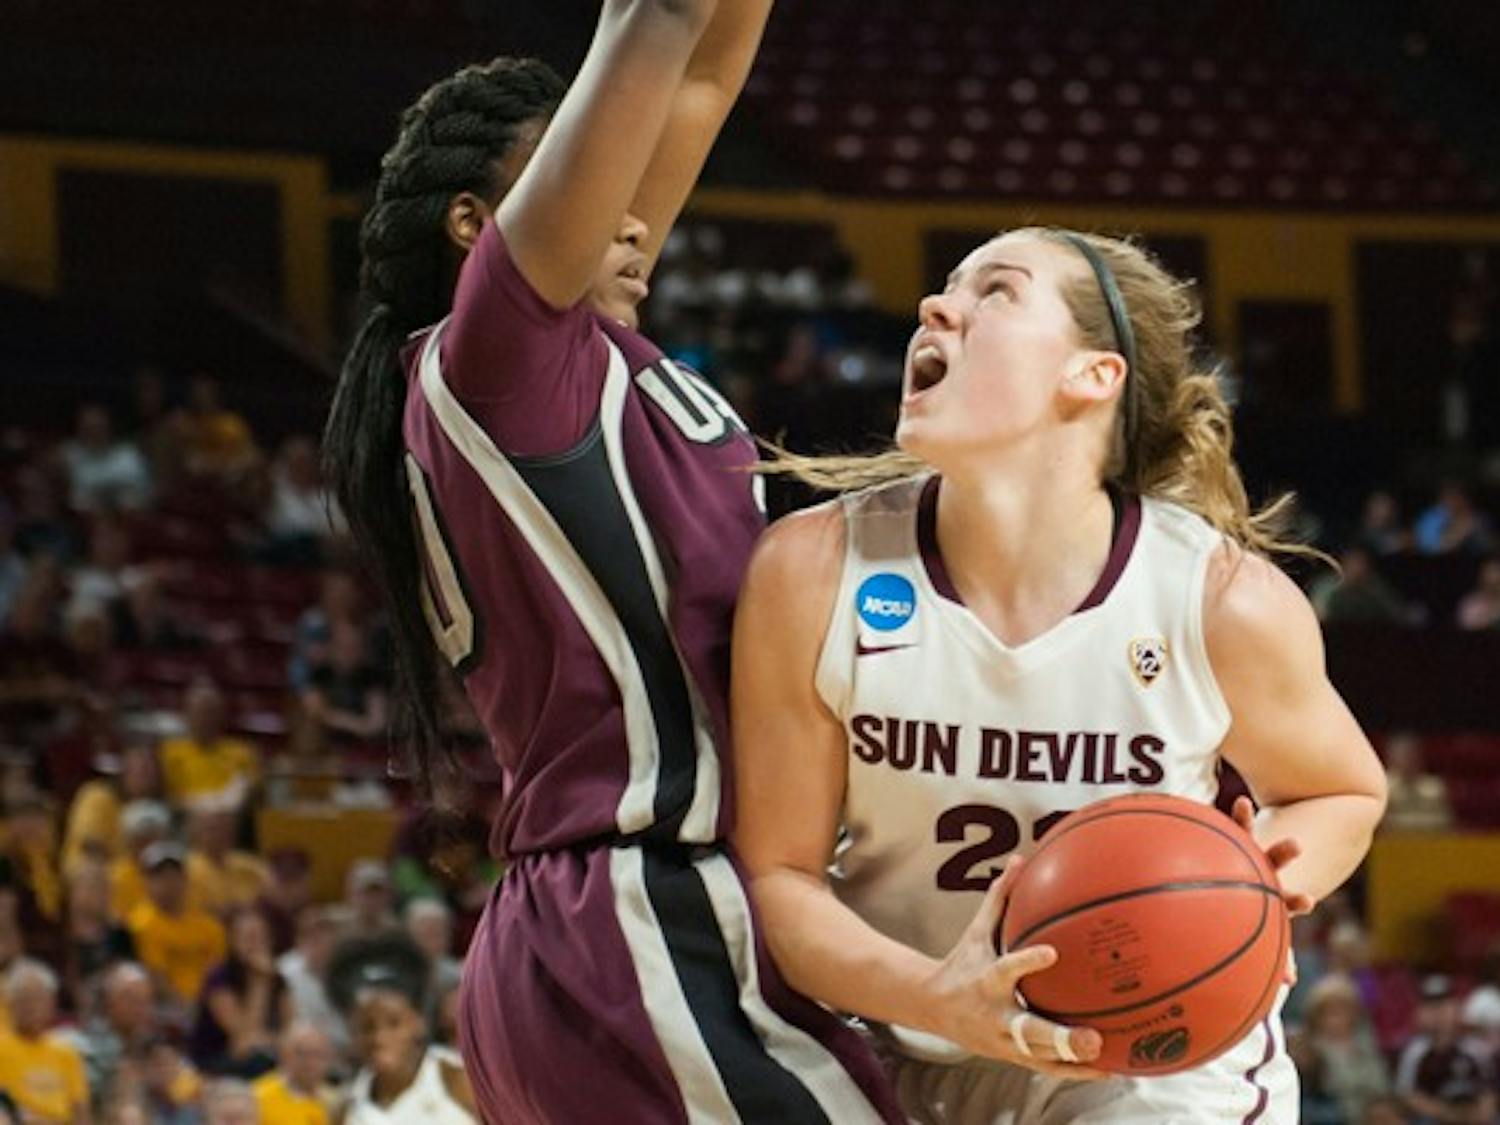 Sophomore forward Sophie Brunner goes up for a layup against UALR in the the second round of the women's NCAA Tournament on Monday, March 23, 2015, at Wells Fargo Arena in Tempe. The Sun Devils came from behind to defeat the Trojans 57-54 and advance to the Sweet 16.